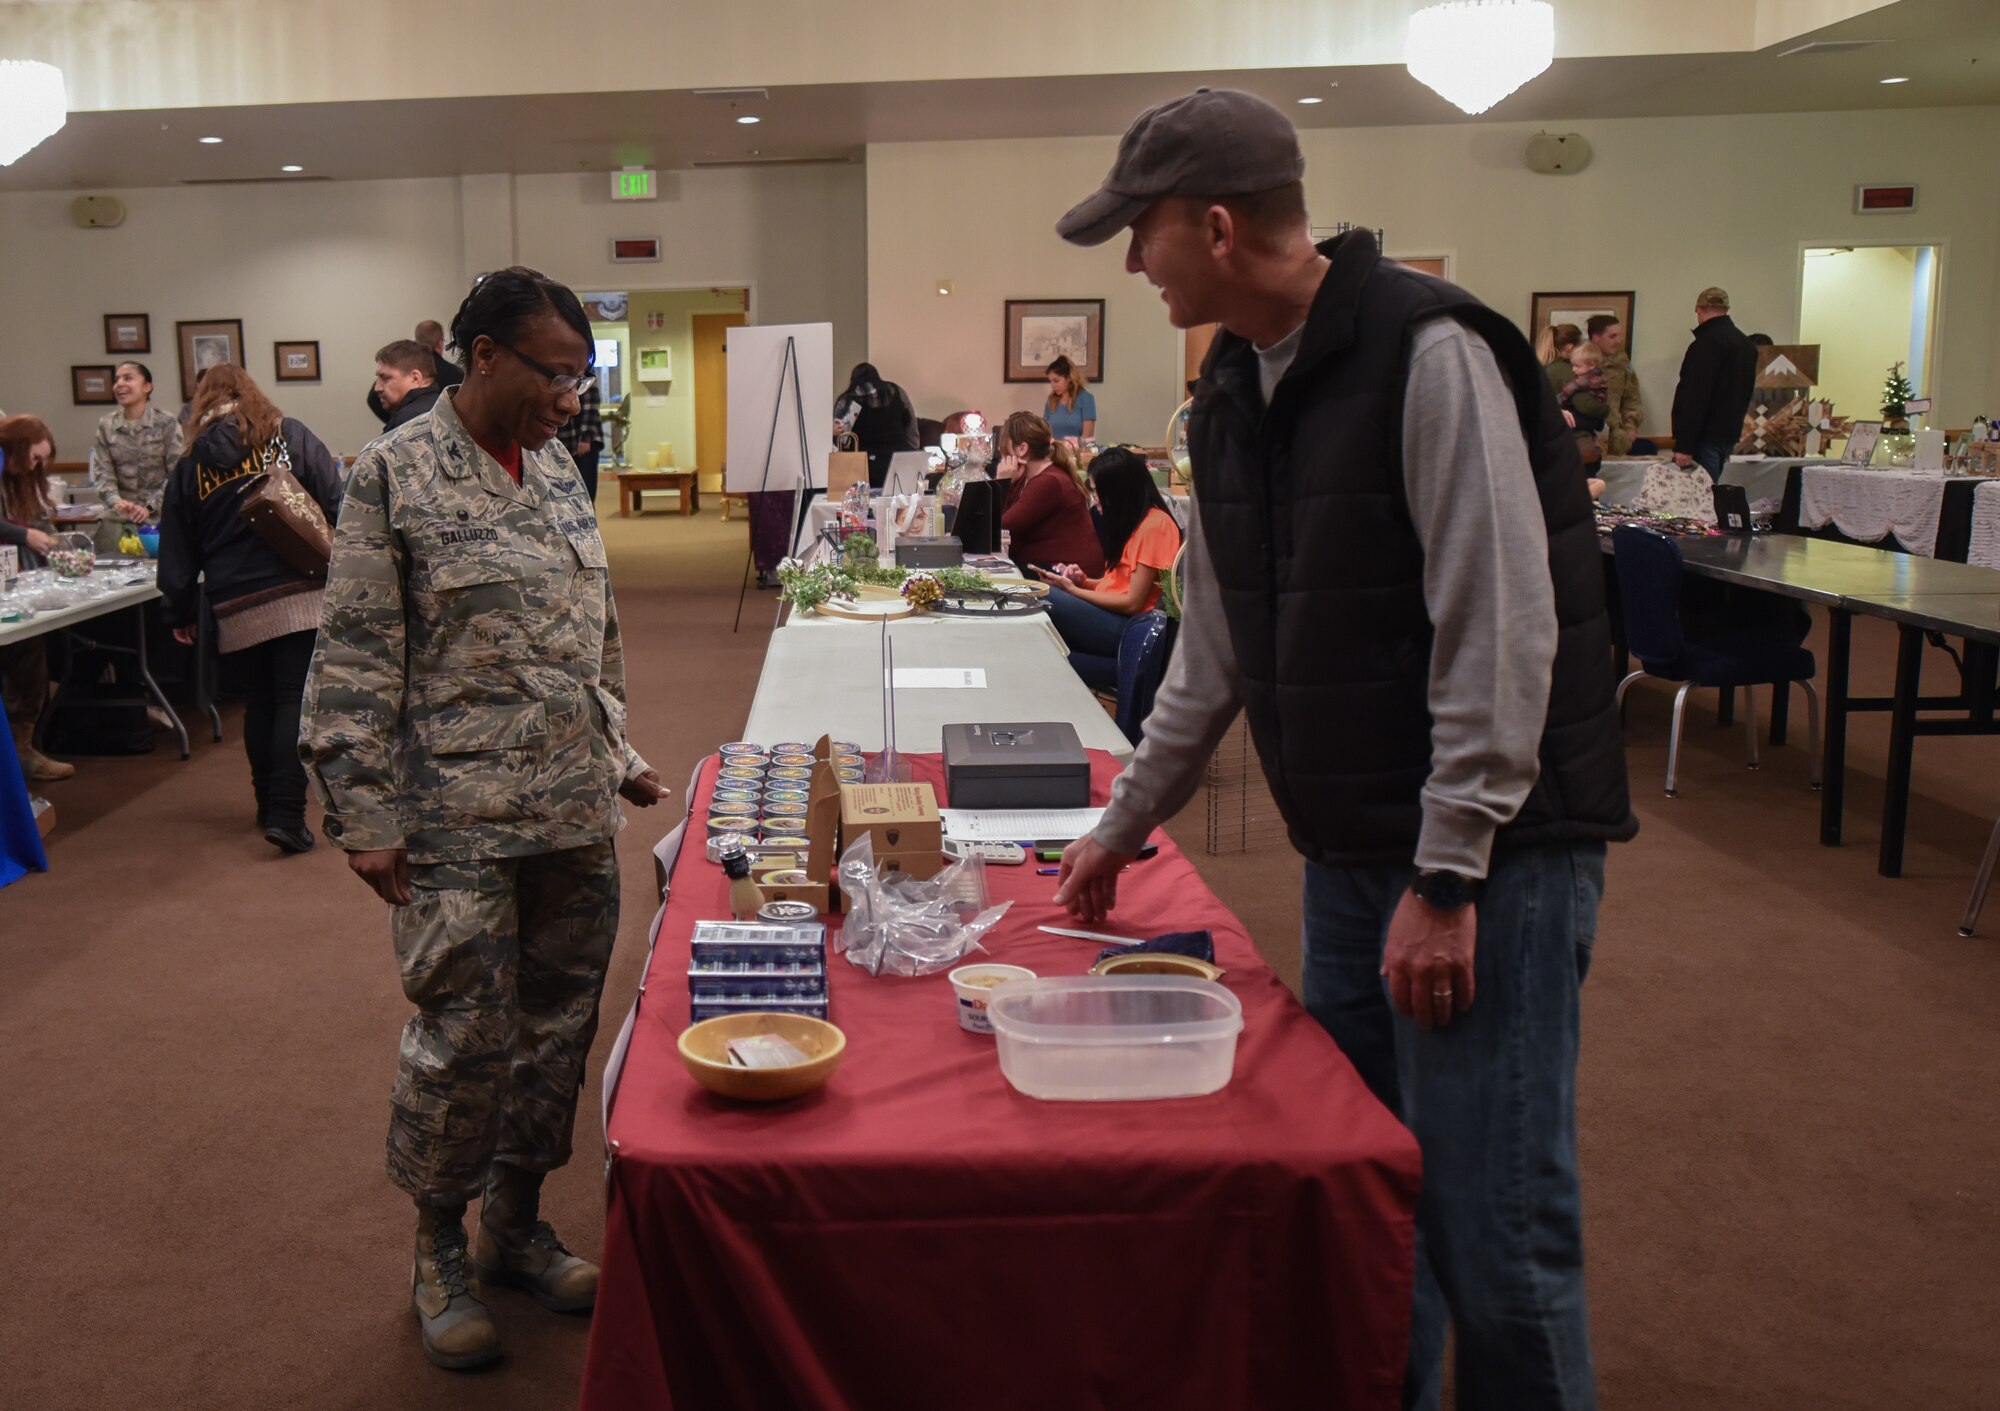 Robert Justice, a vender at the health fair, shows shaving products to Col. Cherron Galluzzo, 90th Medical Group commander, during the Warren top 3 craft fair and health fair on F.E. Warren Air Force Base Wyo, Nov. 17, 2017. Justice, crafts and packages each bar of shaving soap he sells by hand. (U.S. Air Force photo by Airman 1st Braydon Williams)